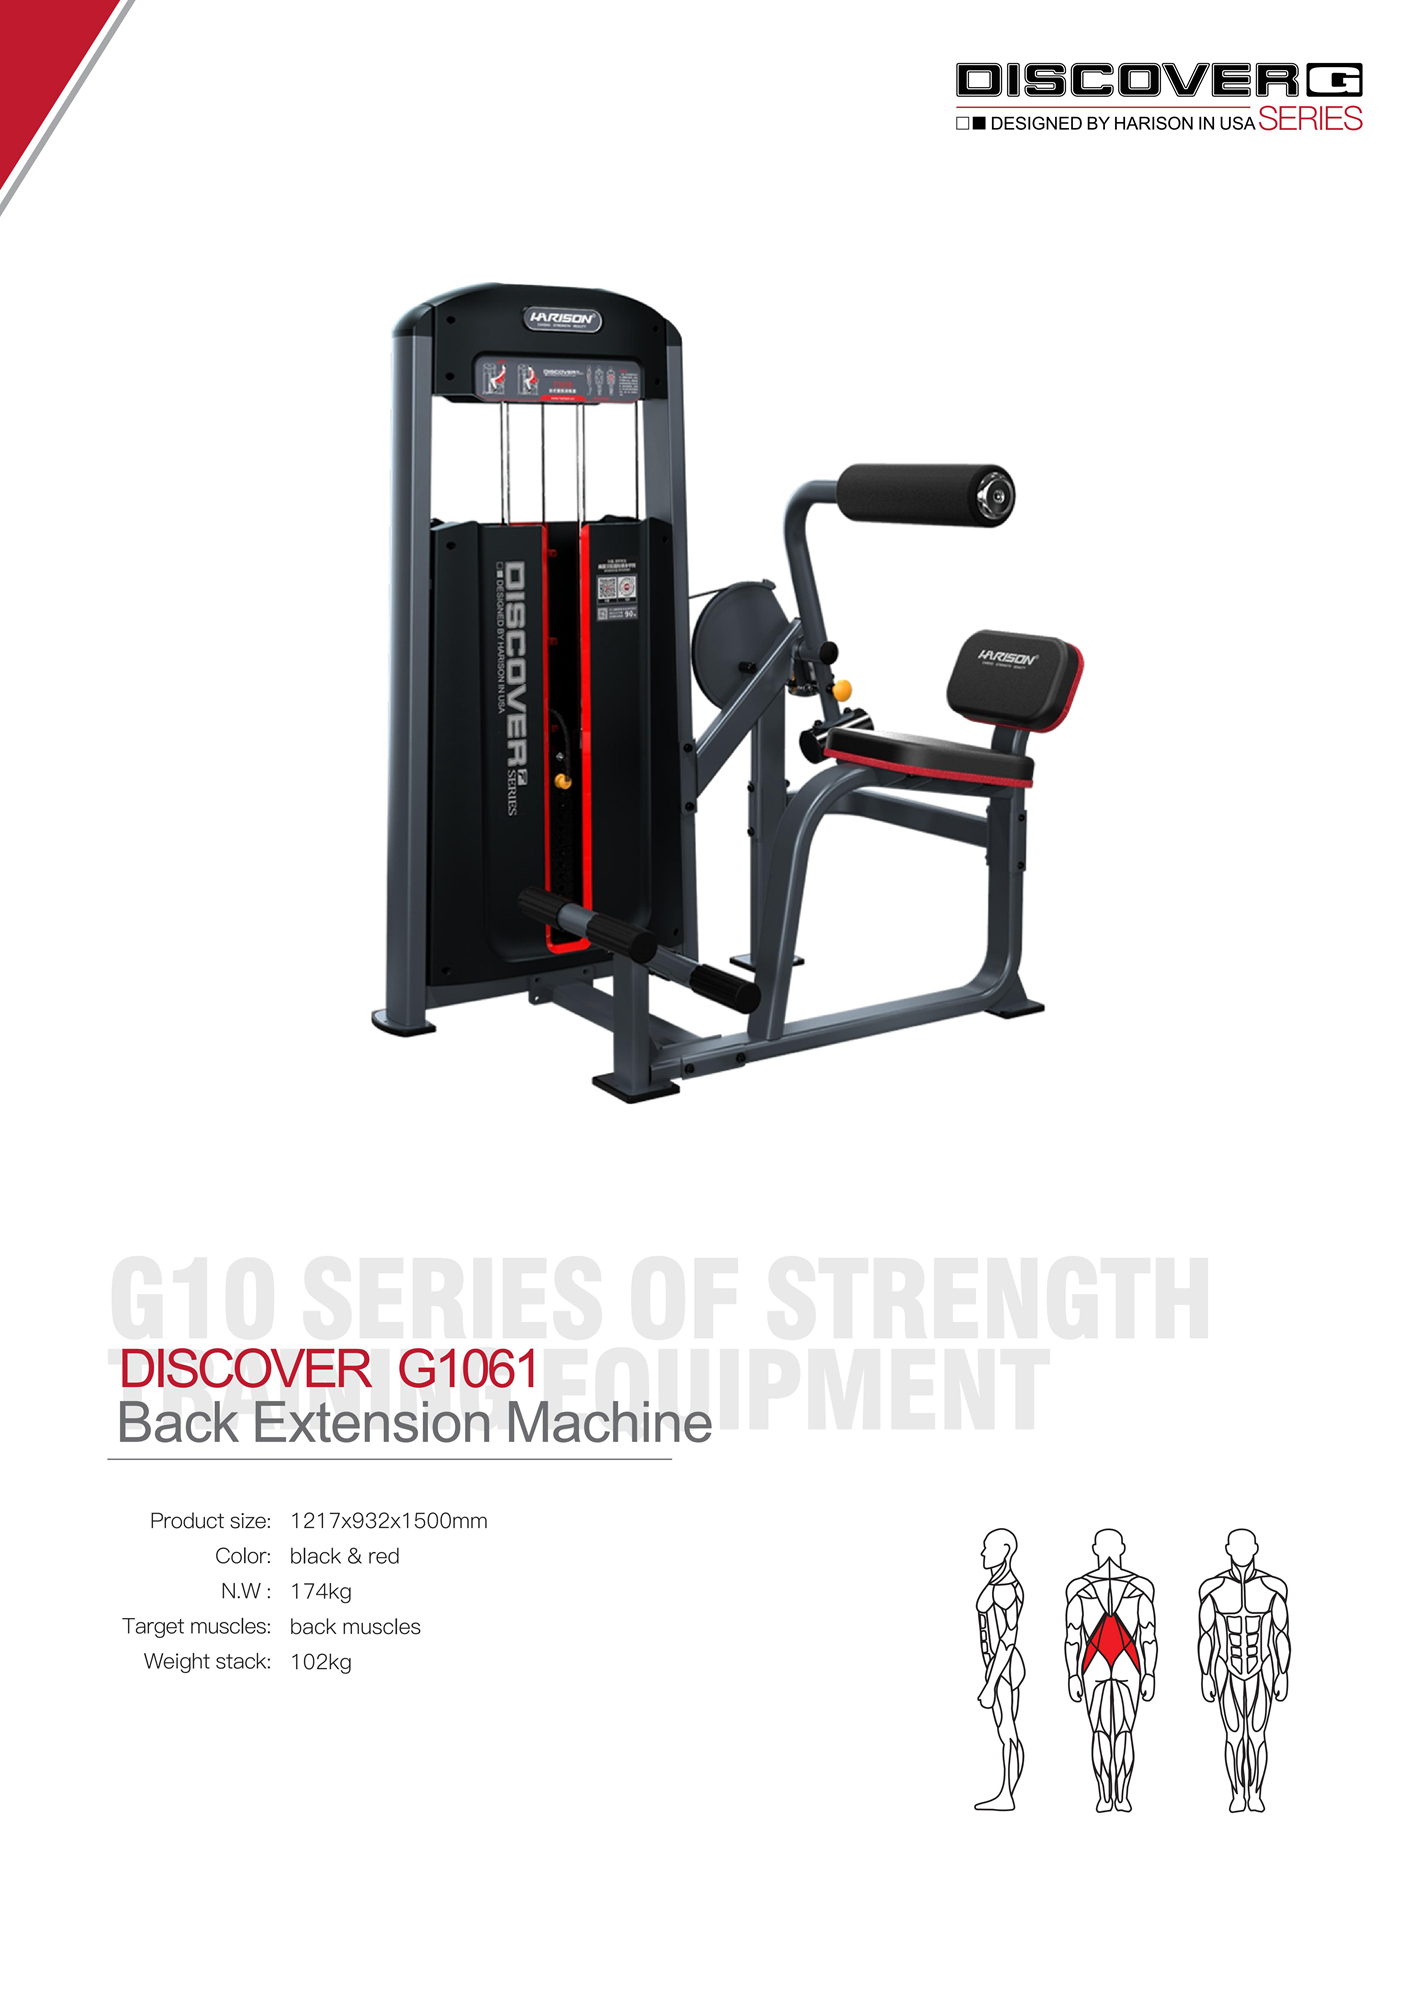 DISCOVER G1061 Back Extension Machine